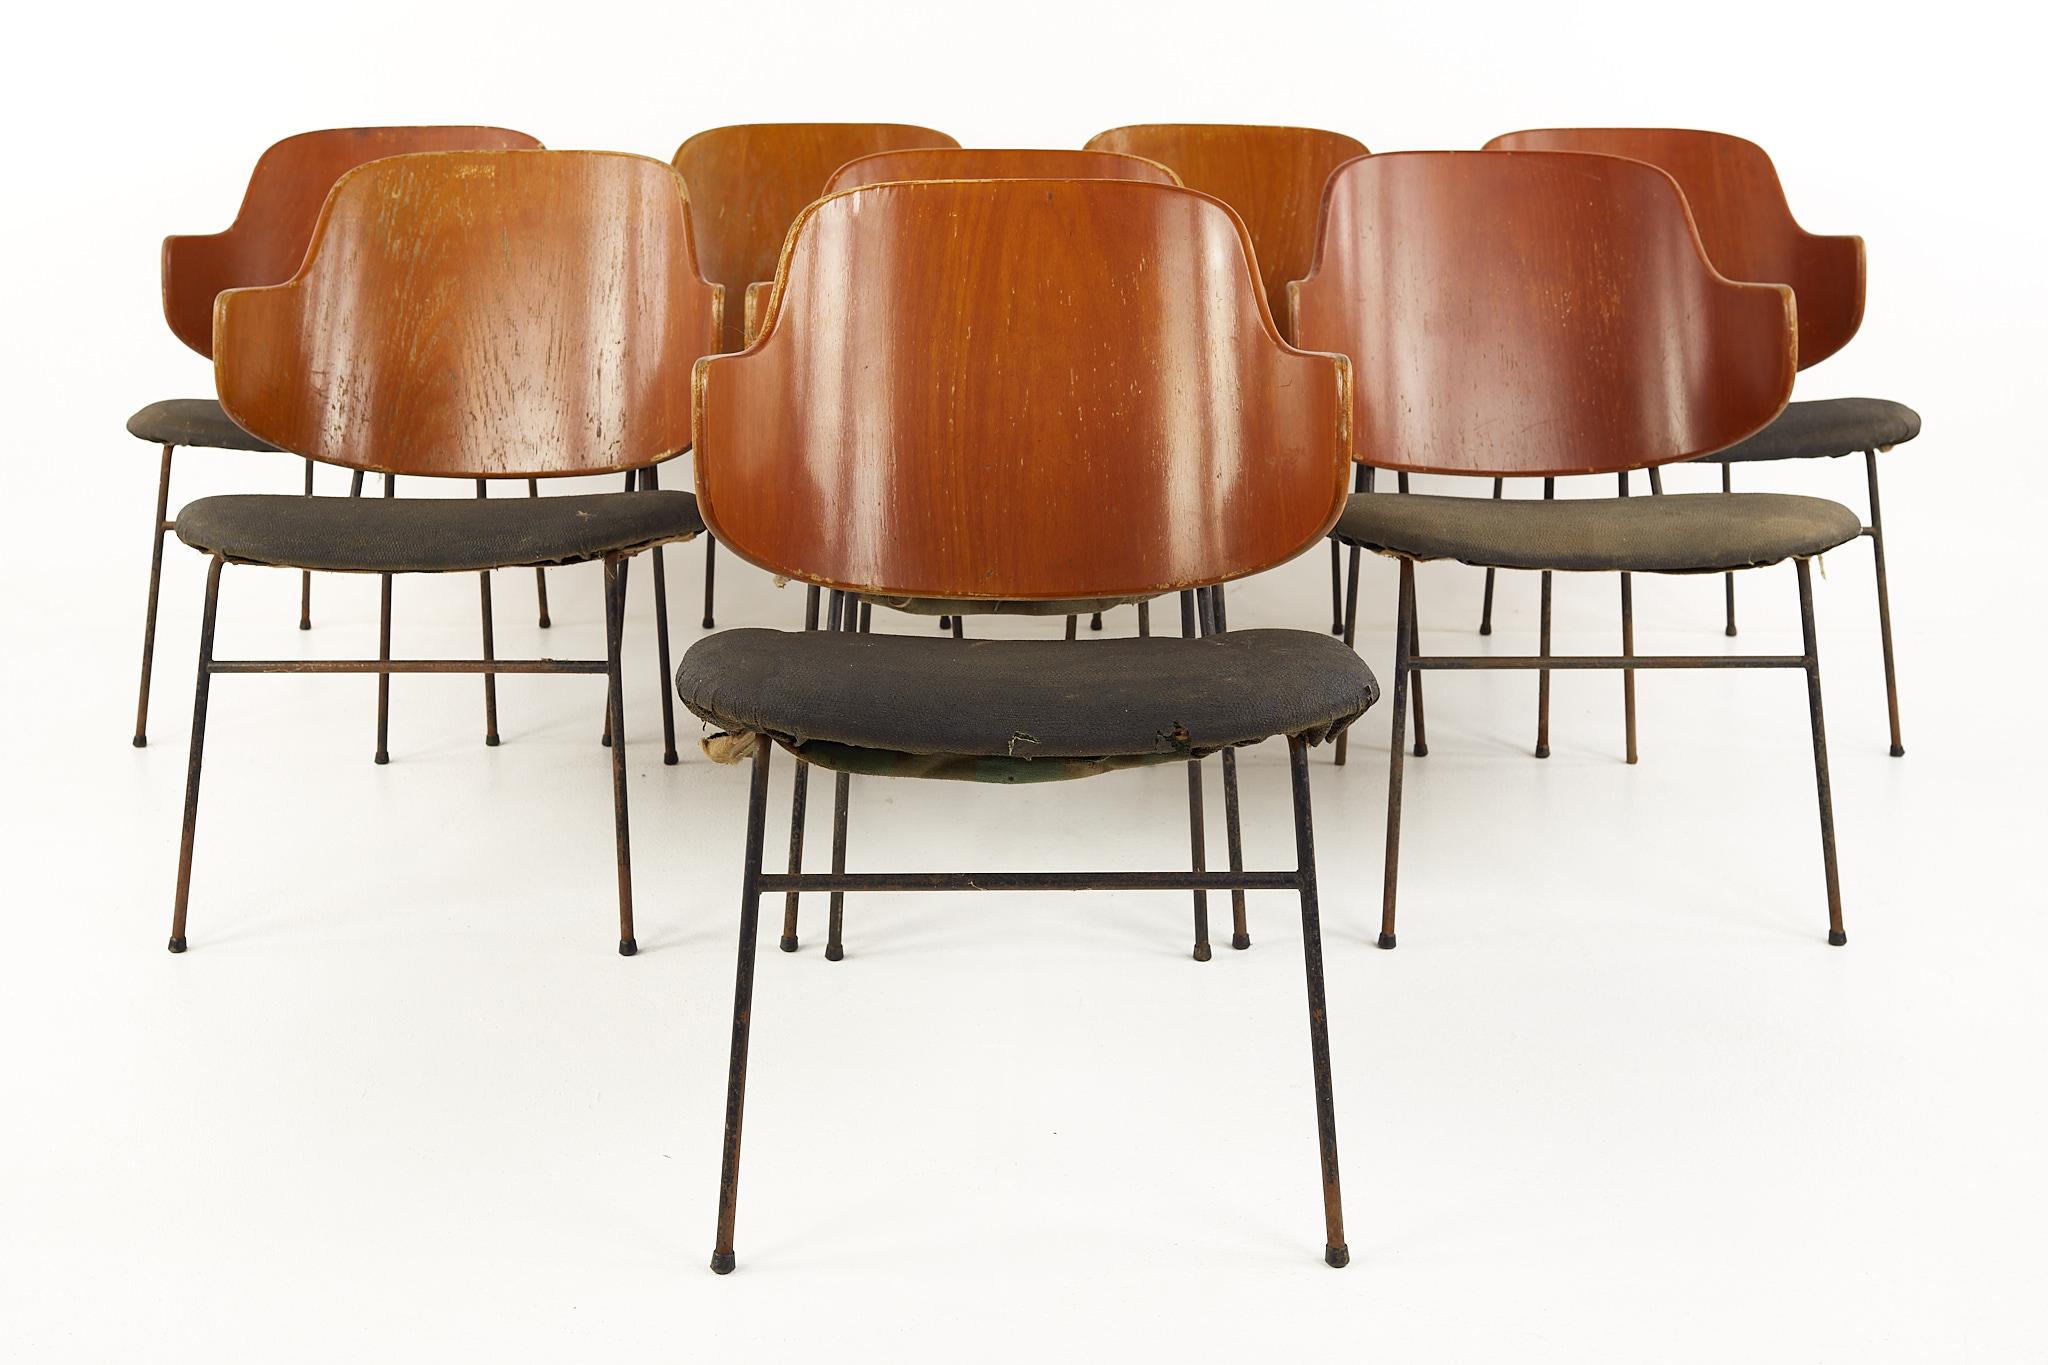 Kofod Larsen mid century penguin wrought iron and bent plywood dining chairs - Set of 8

Each chair measures: 20.5 wide x 24 deep x 28.75 inches high, with a seat height of 16 inches

Ready for new upholstery. This service is available for an